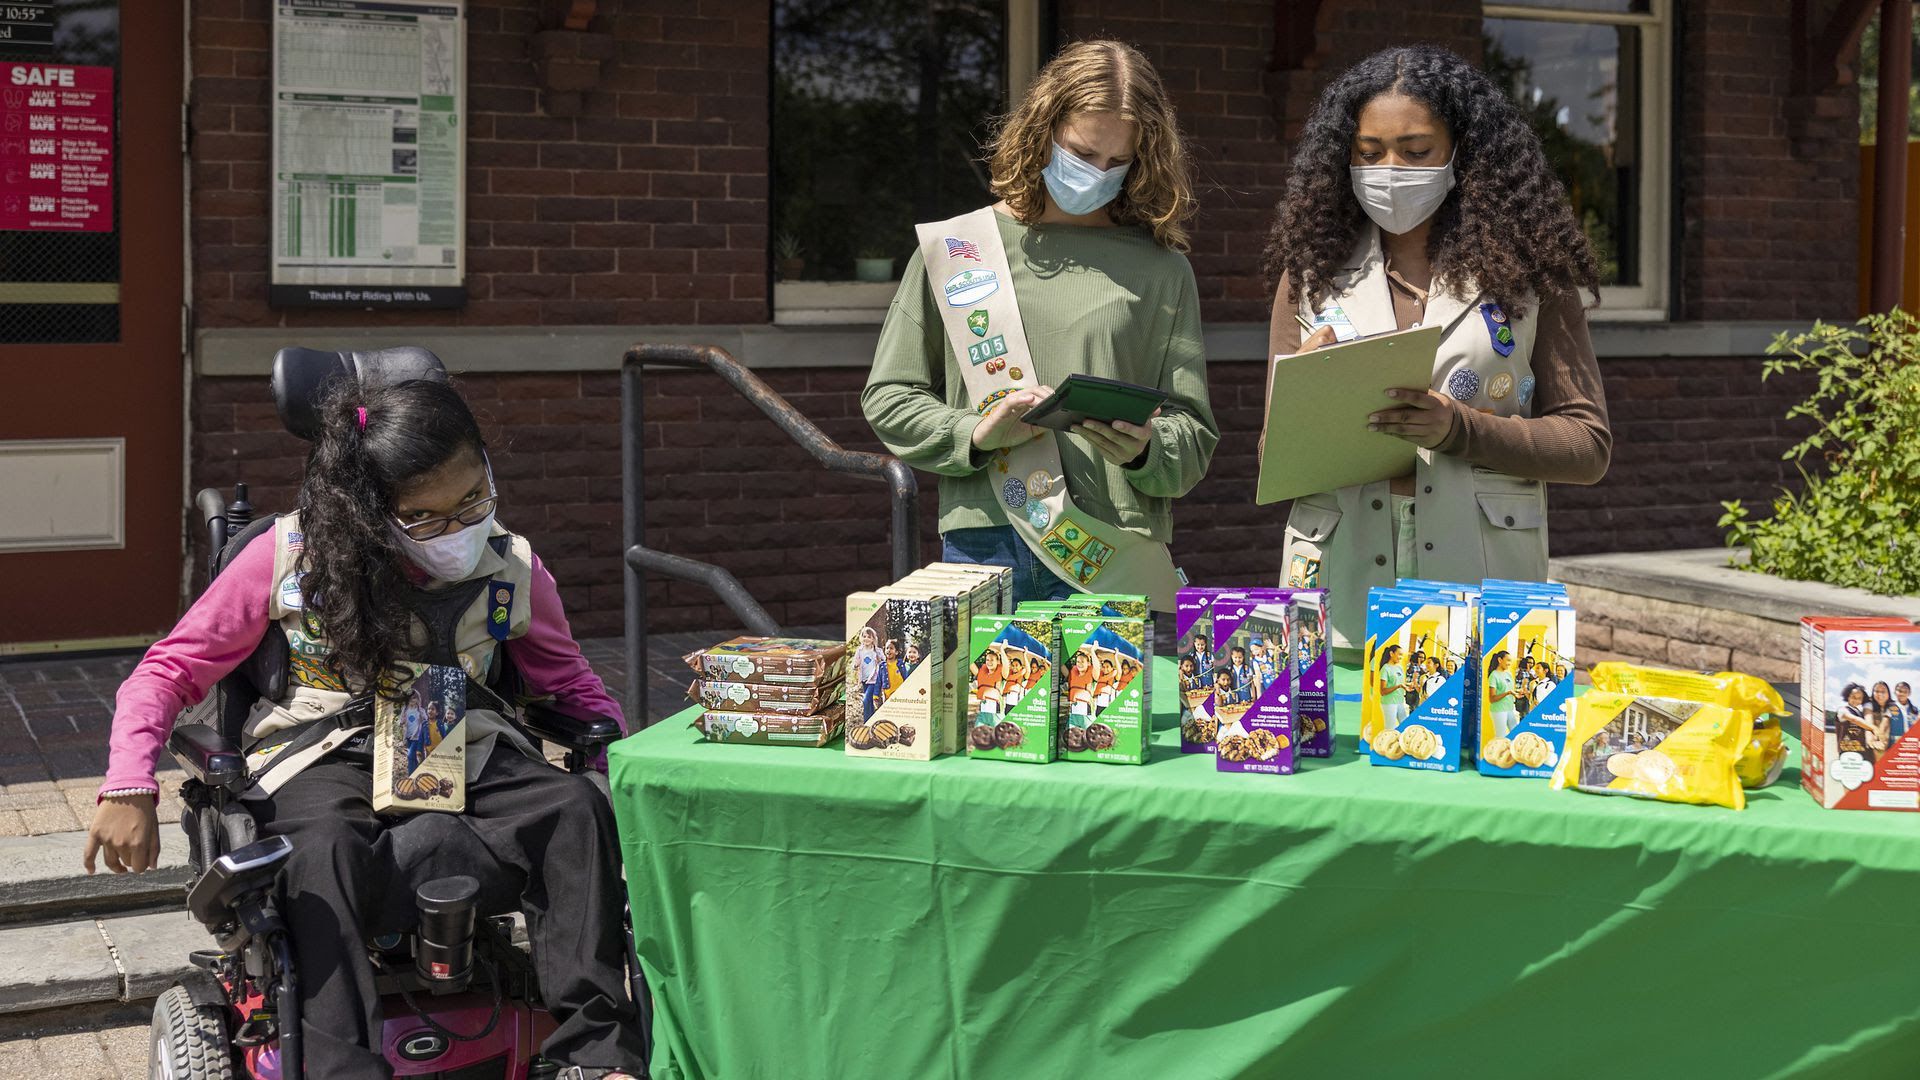 Two girl scouts selling cookies